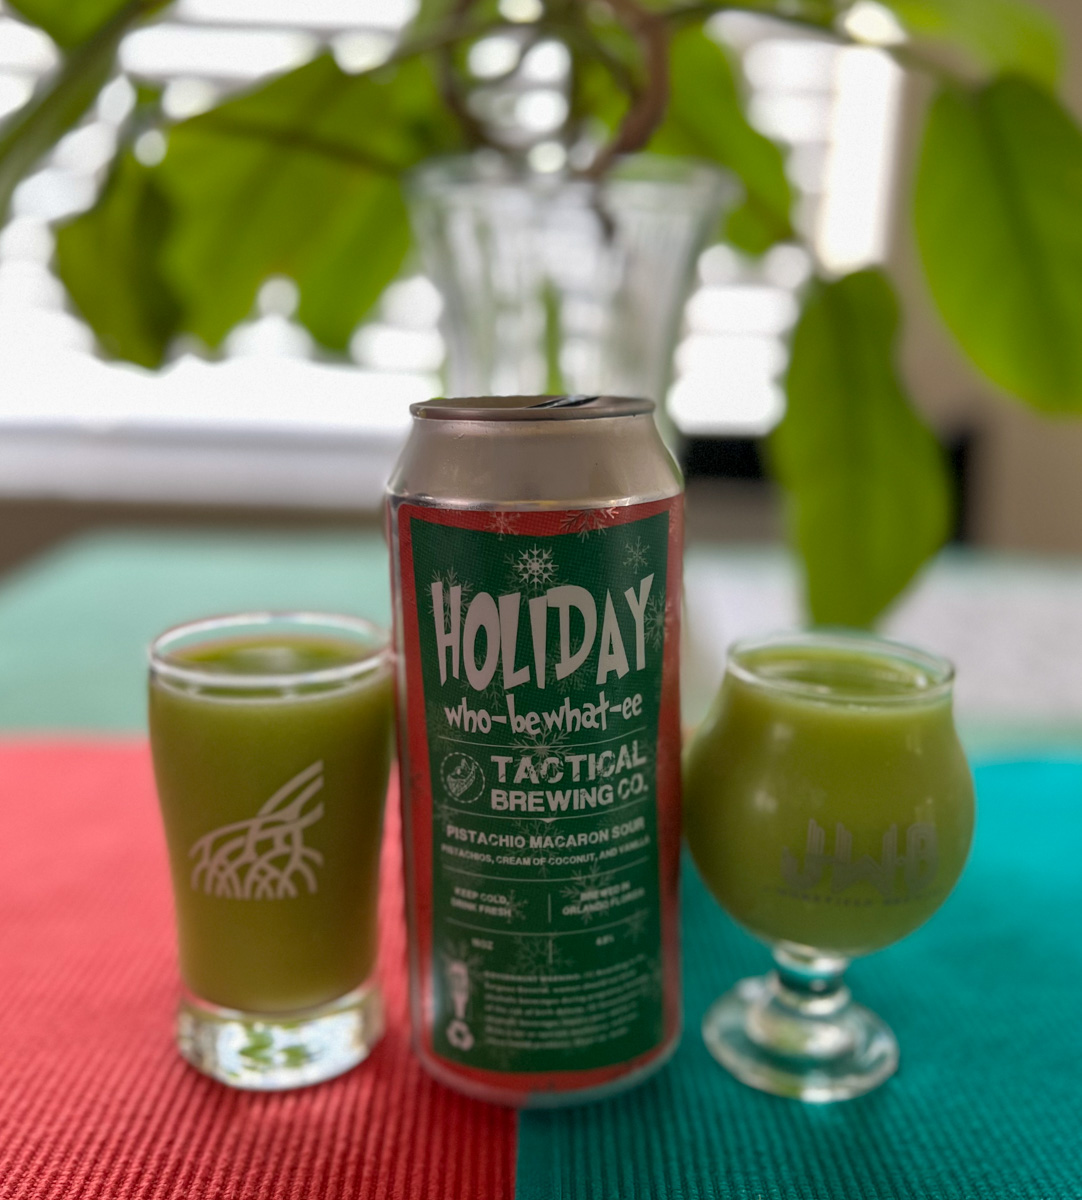 Holiday Who-Be What-ee - Tactical Brewing Co. | ViewFromALove